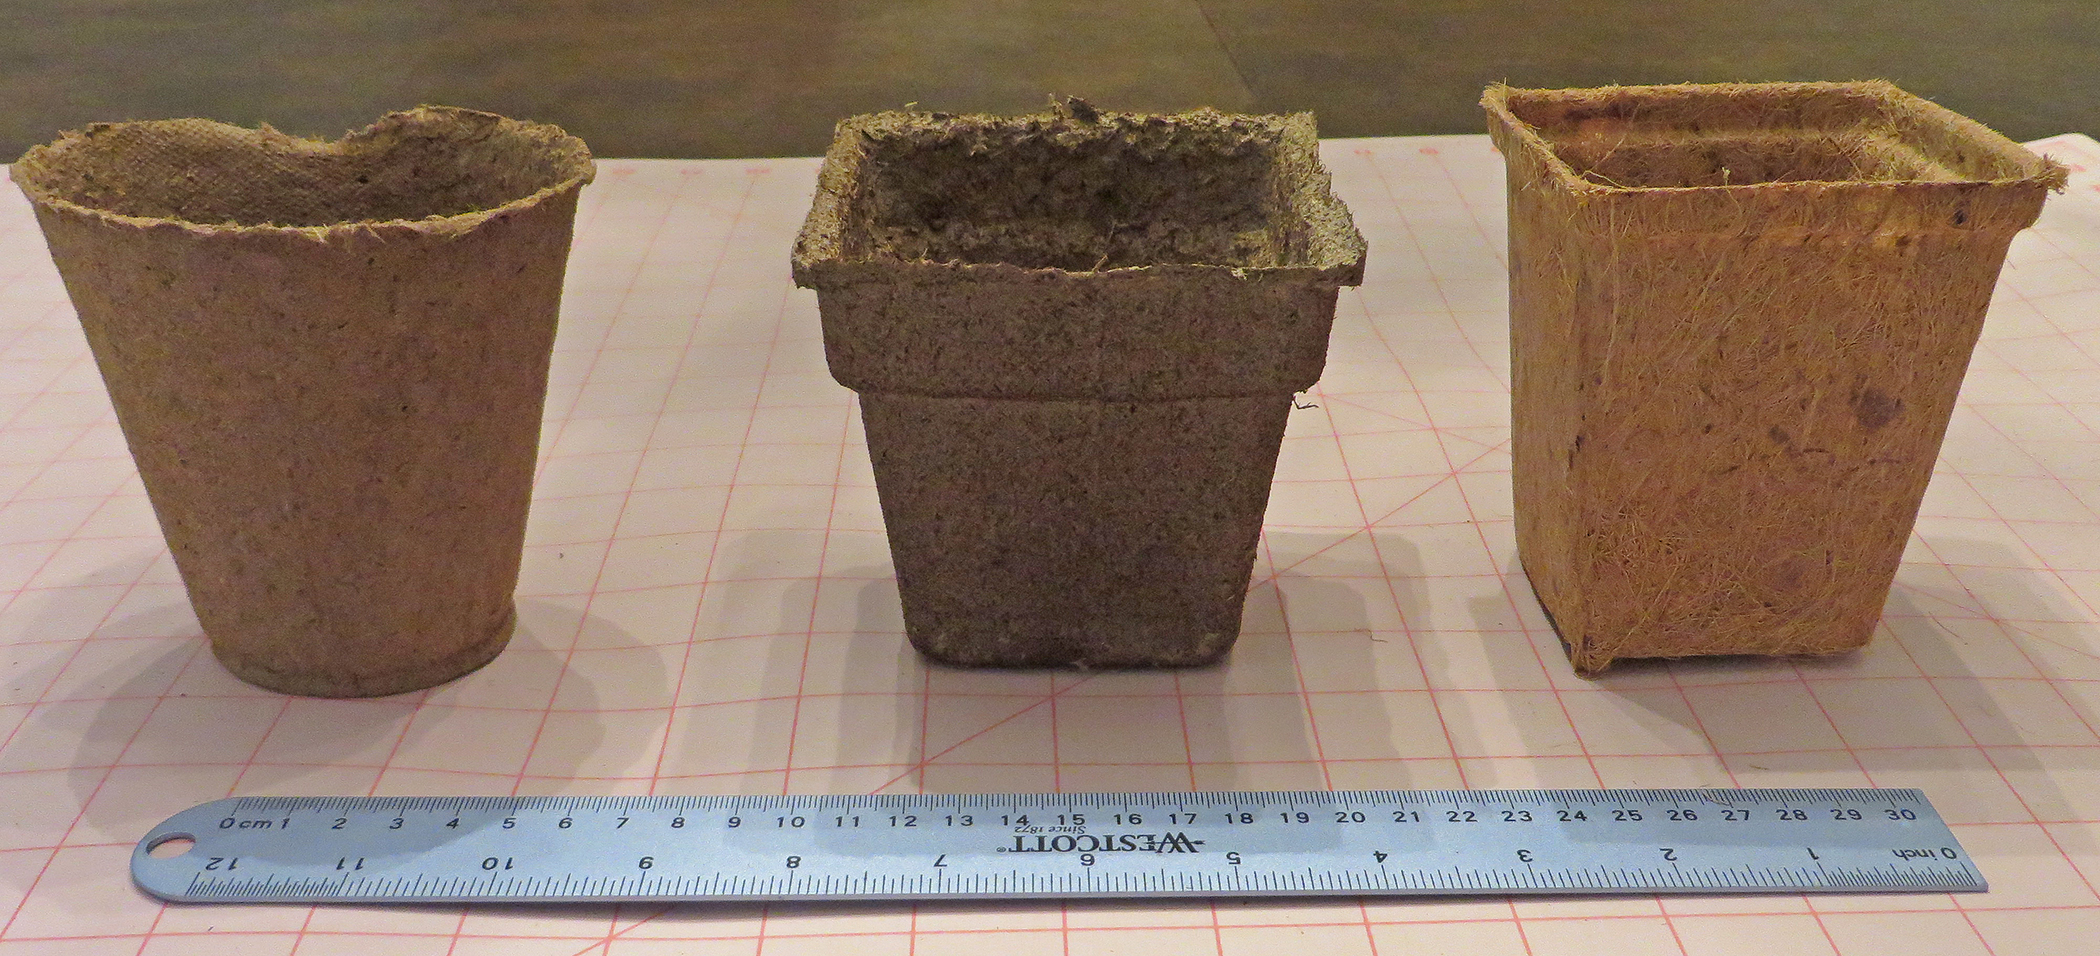 https://news.uga.edu/wp-content/uploads/2020/11/biodegradable-containers-left-to-right-wood-pulp-fiber-cow-manure-coconut-coir.jpg